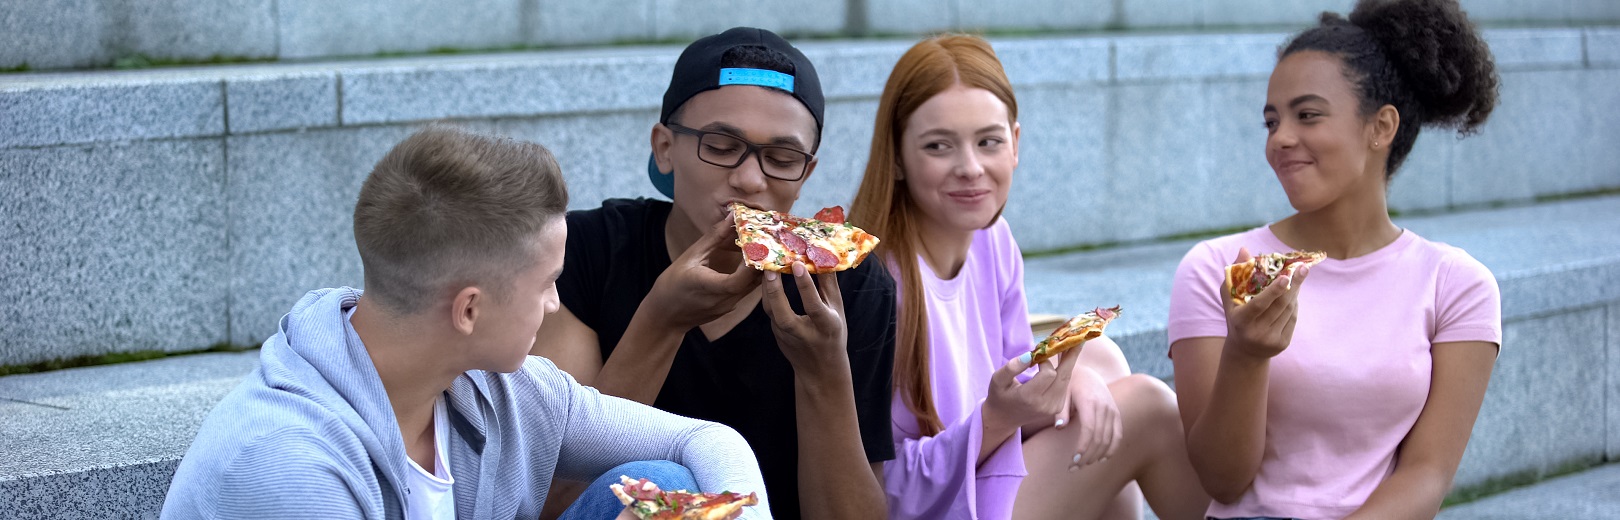 Four teenagers eating pizza on some outdoor stairs